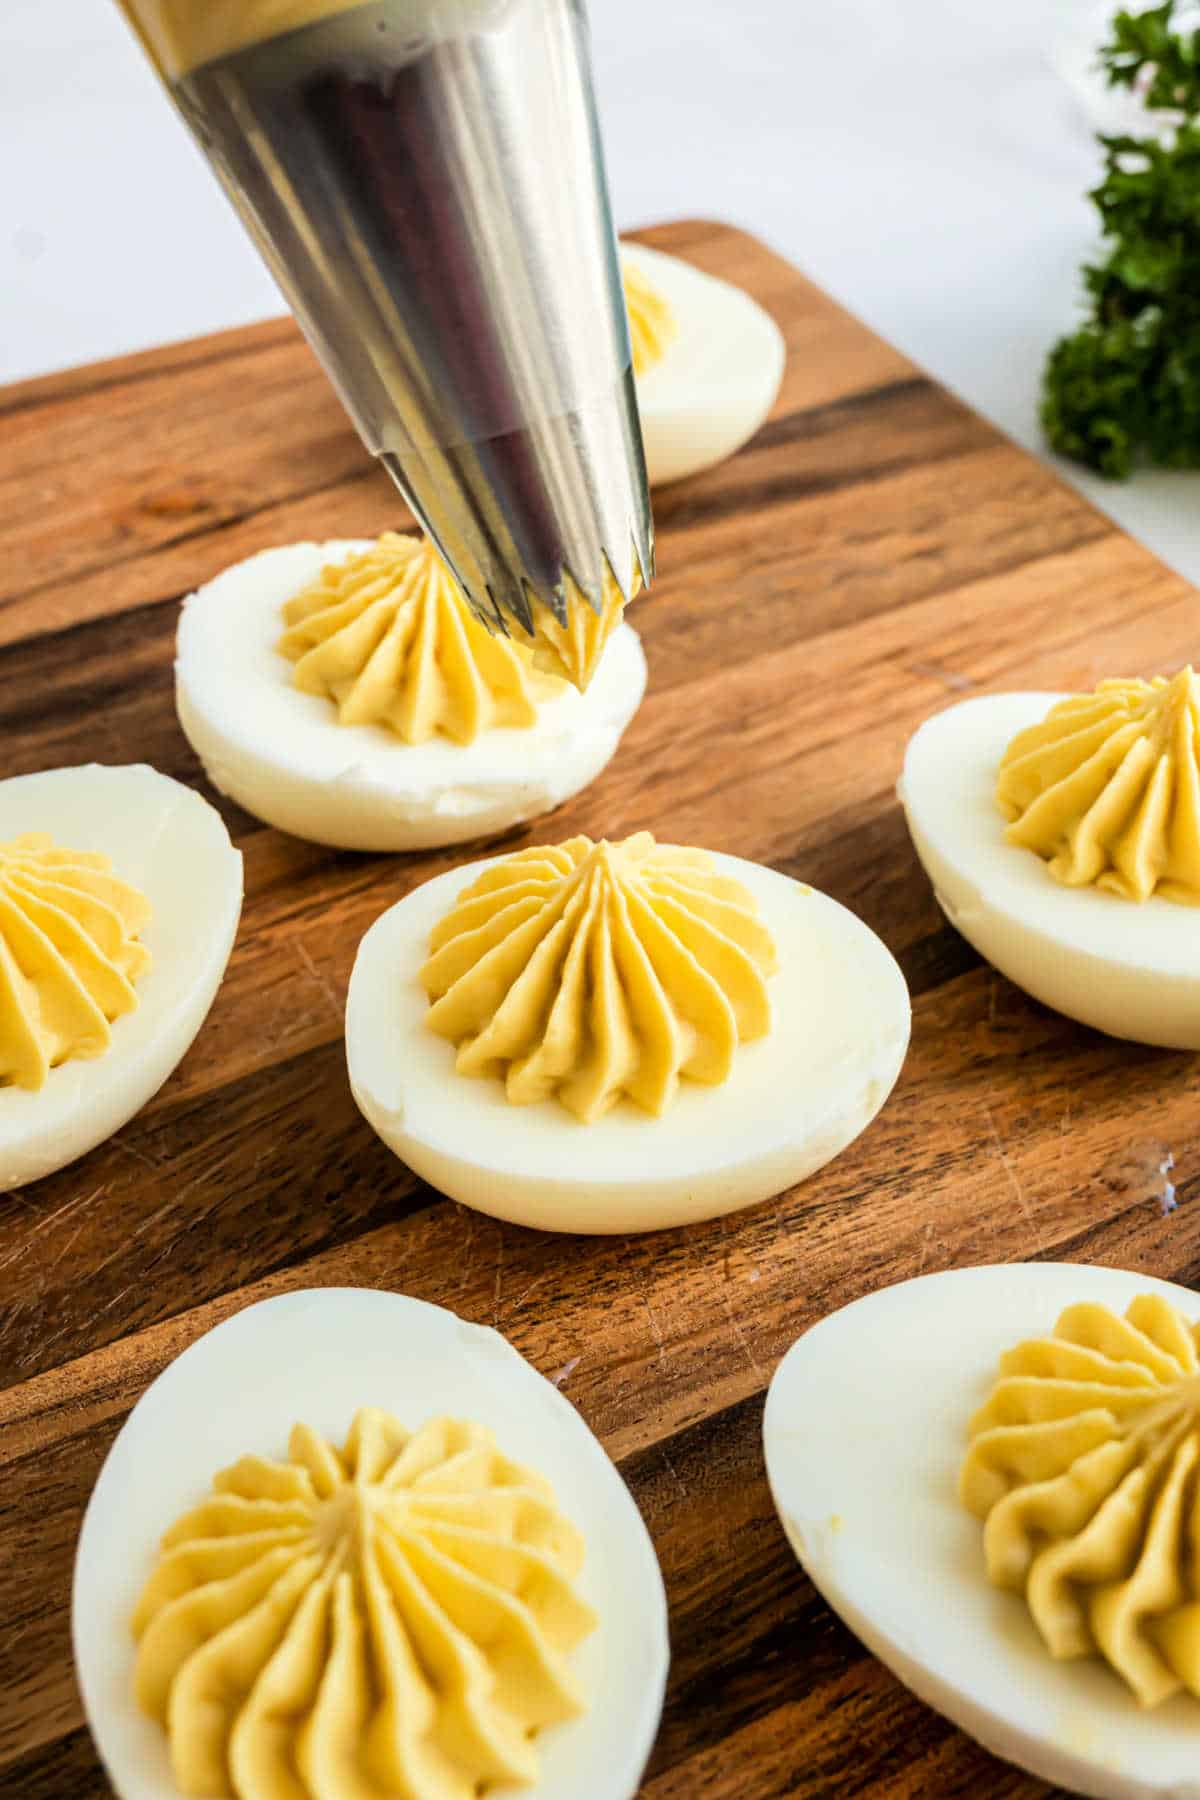 Deviled egg filling being piped onto an egg white.